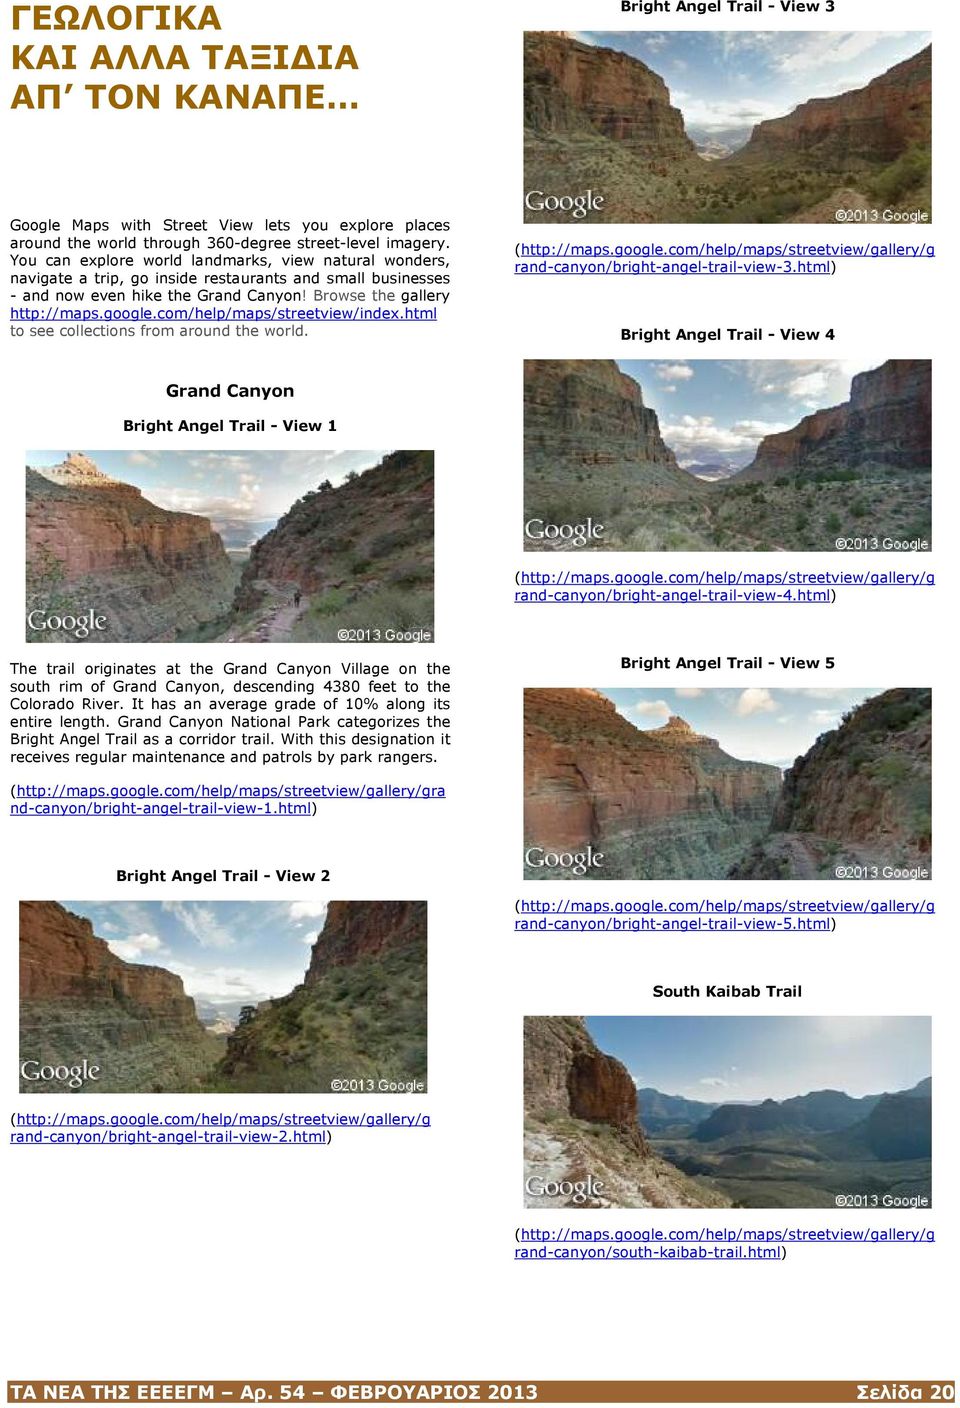 com/help/maps/streetview/index.html to see collections from around the world. (http://maps.google.com/help/maps/streetview/gallery/g rand-canyon/bright-angel-trail-view-3.